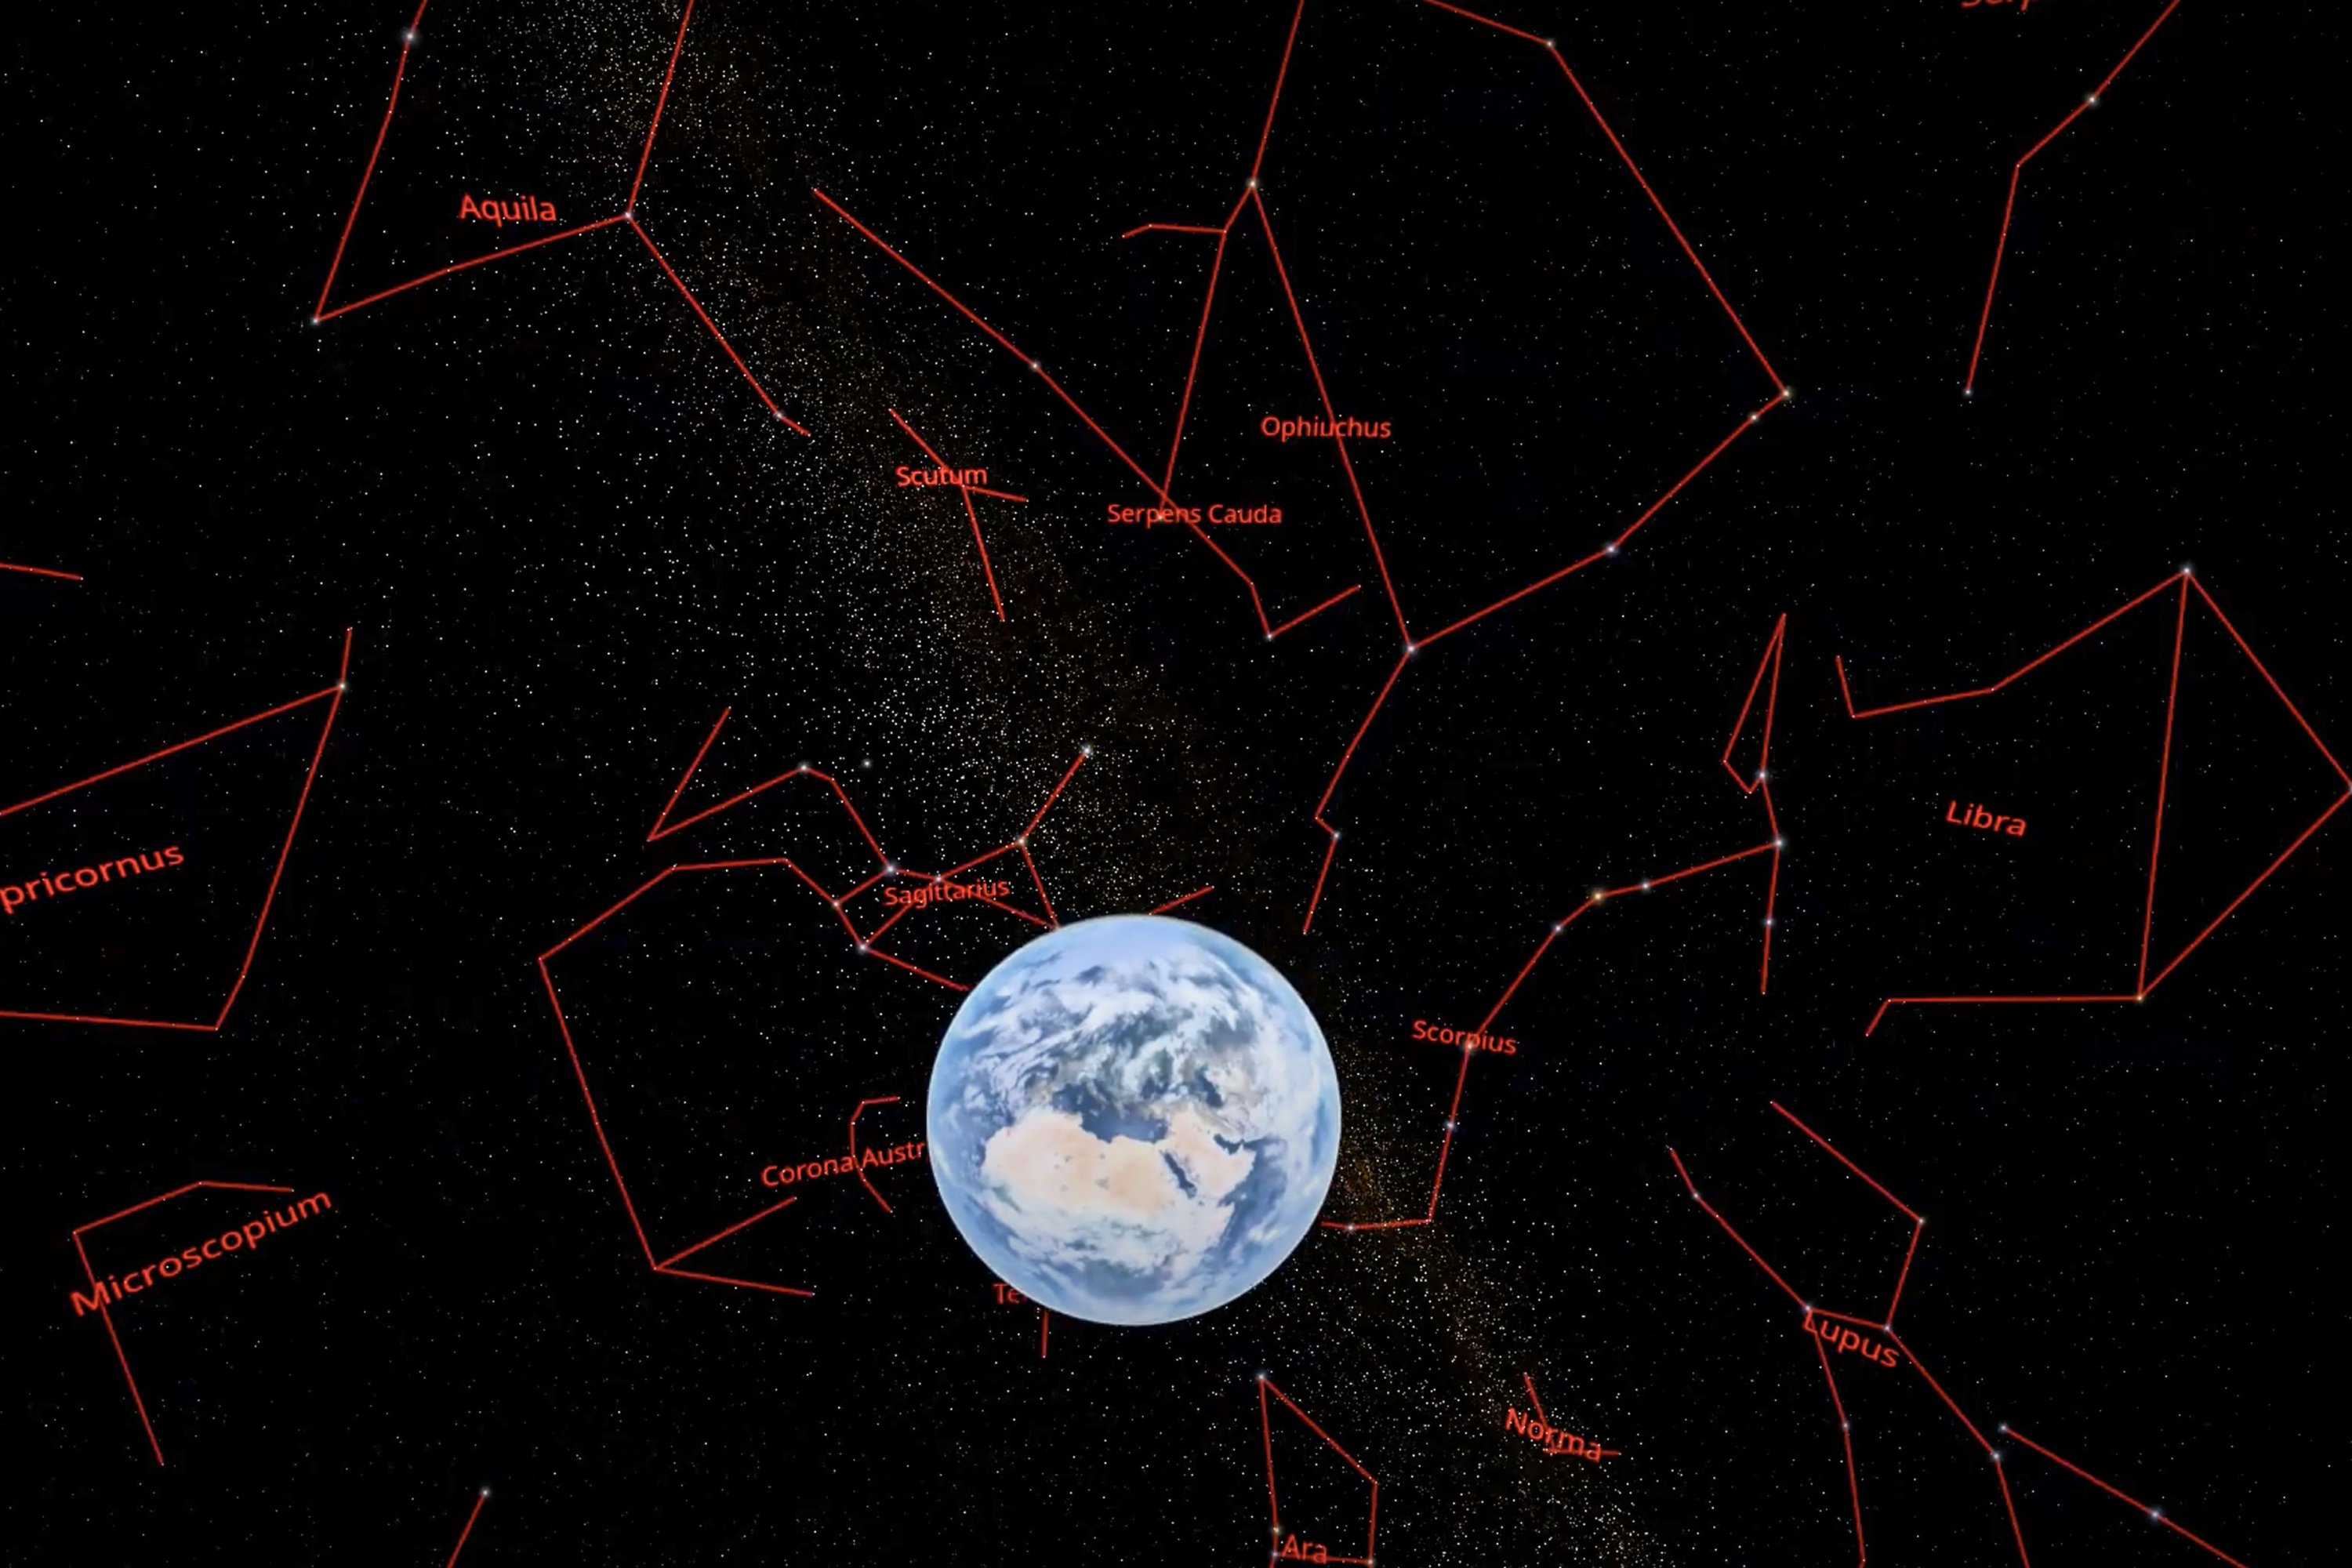 An image grab from a handout computer animation made available on July 19, 2020, by the Swiss Federal Institute of Technology Lausanne (EPFL) shows the Earth with stellar constellations. (Photo by Handout / Swiss Federal Institute of Technology Lausanne / AFP)